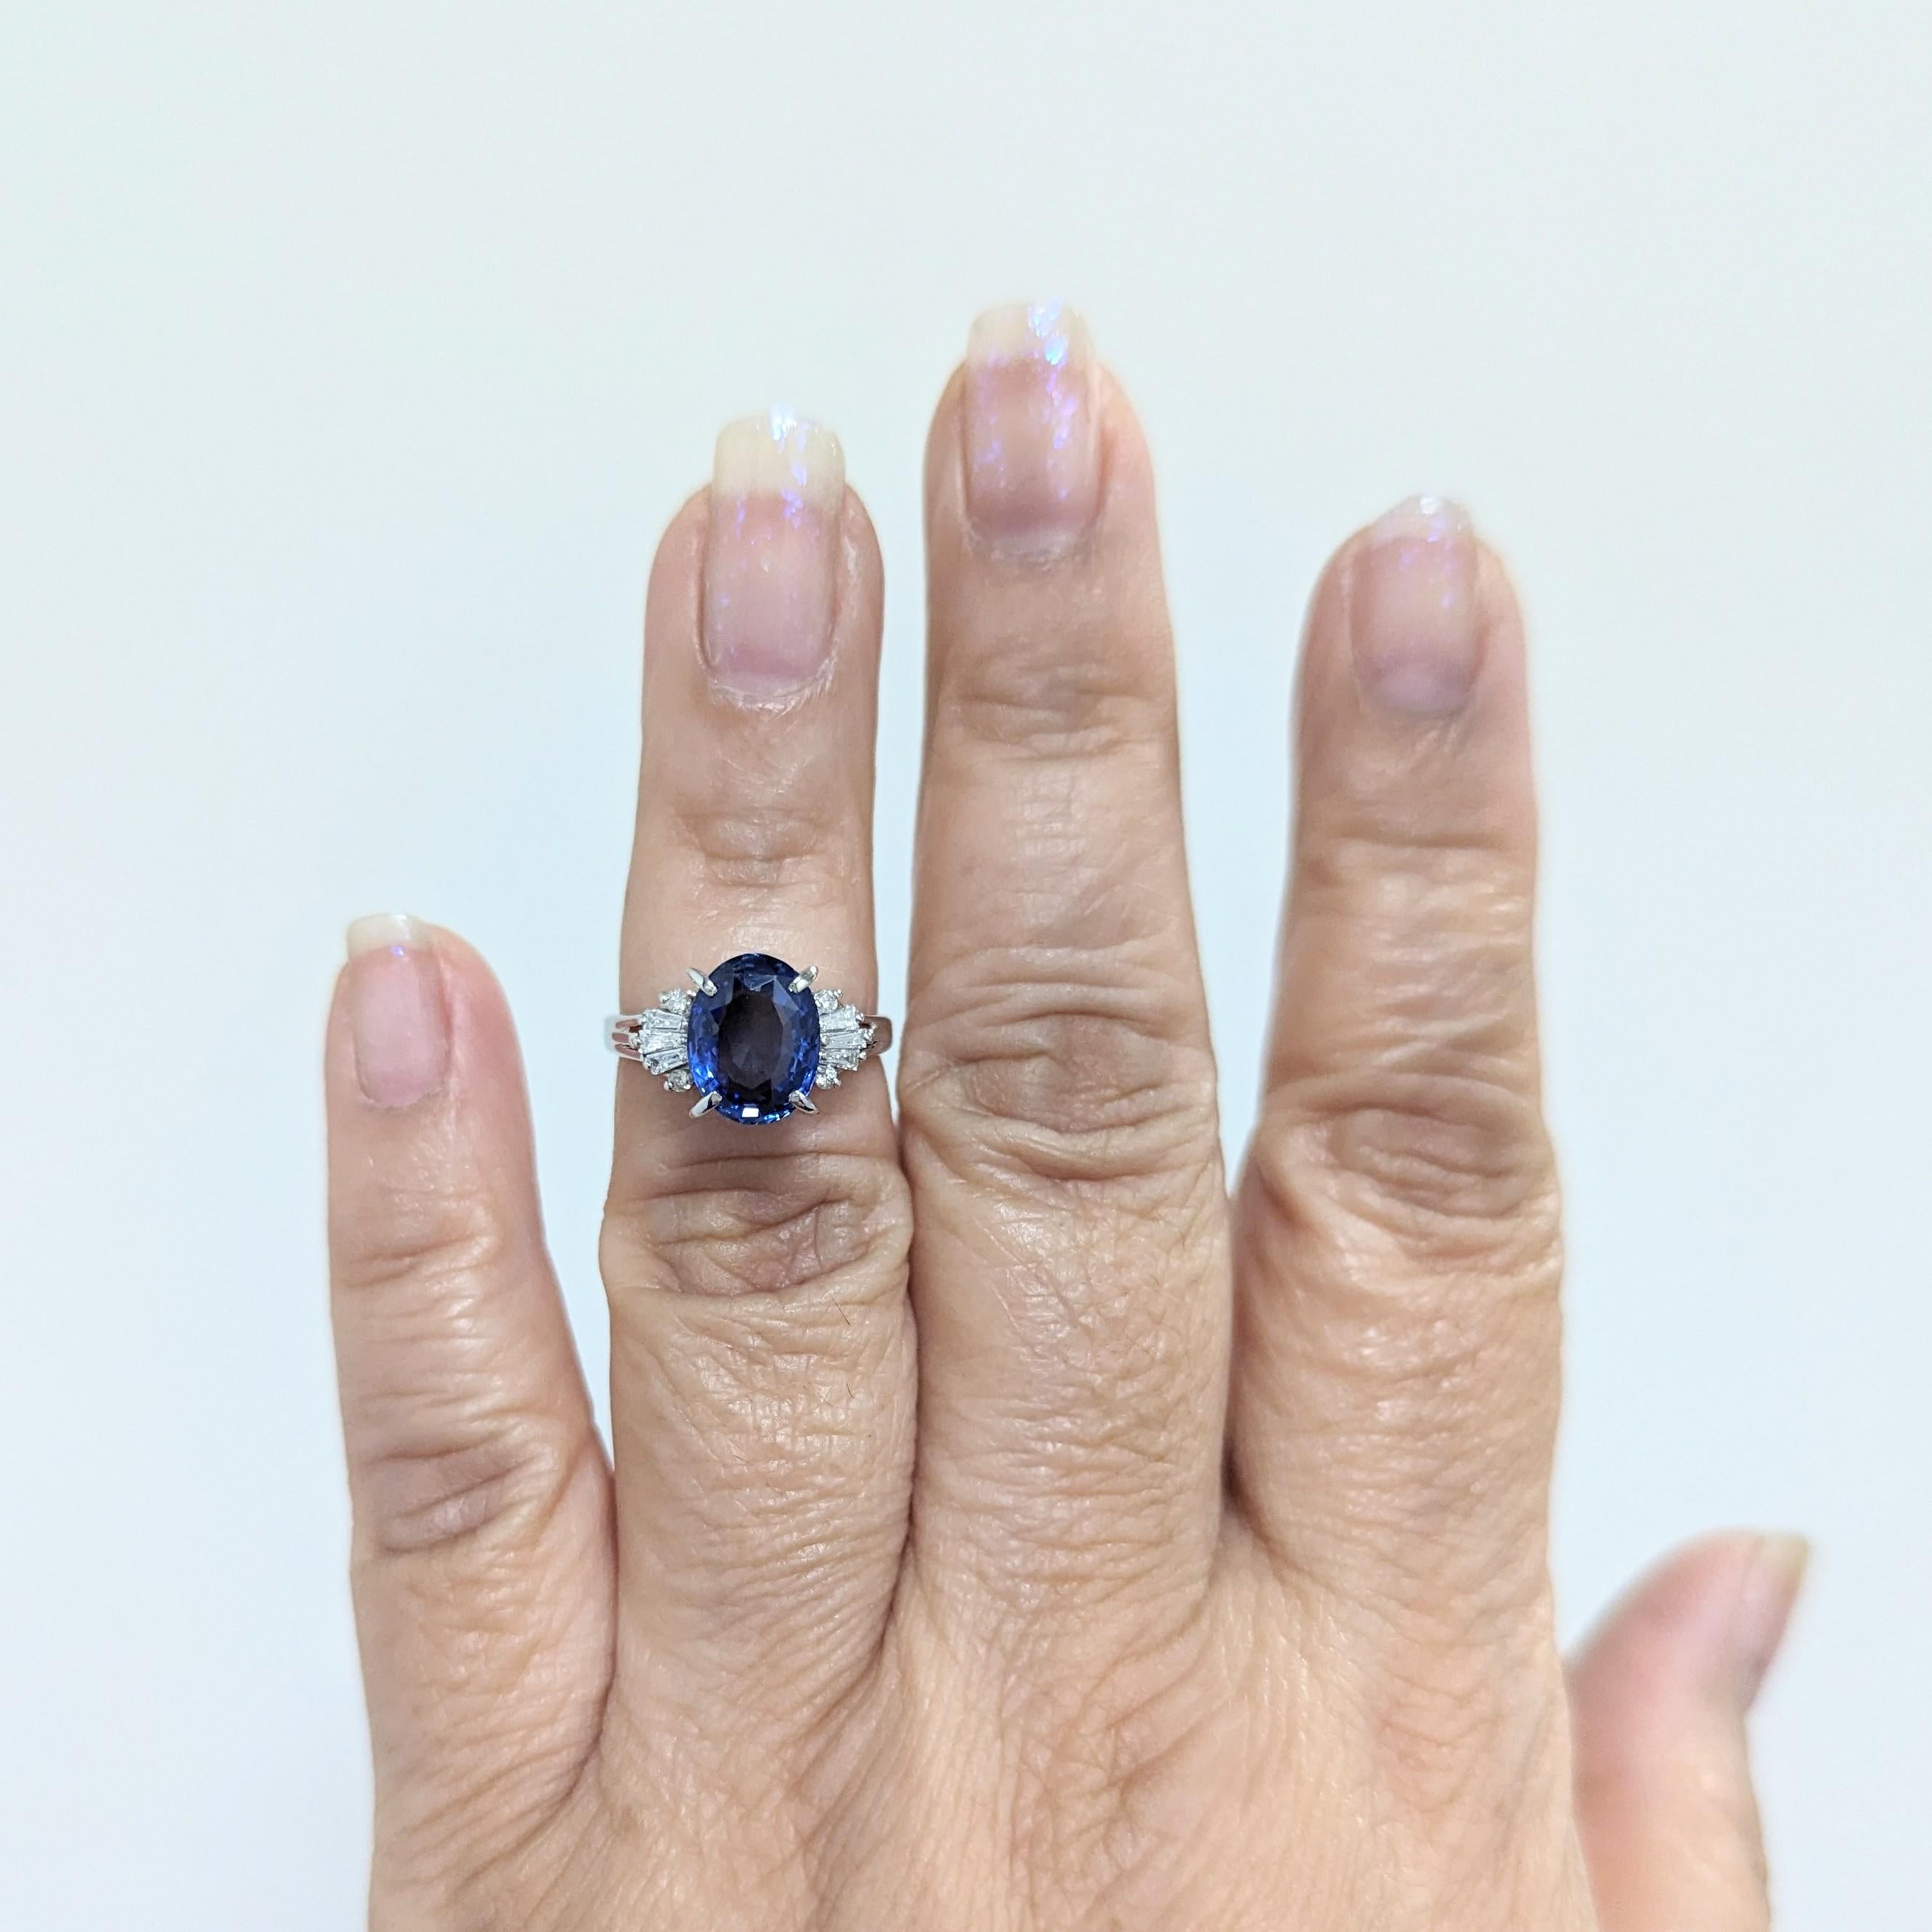 Gorgeous 3.66 ct. blue sapphire oval with 0.20 ct. good quality white diamond baguettes.  Handmade in platinum.  Ring size 6.5.